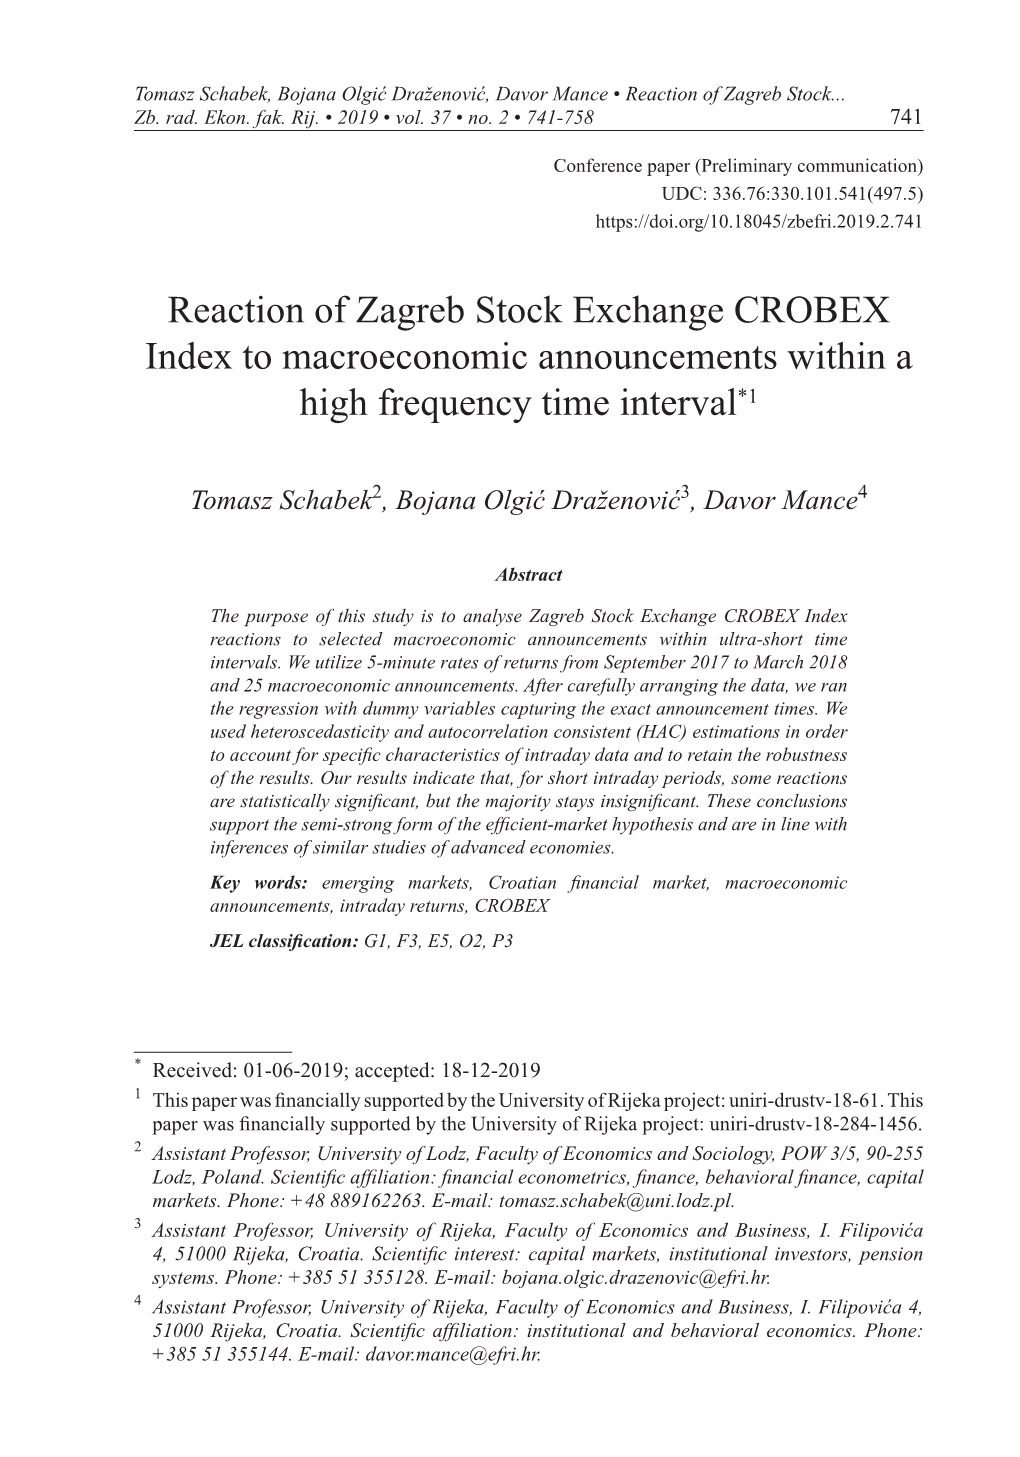 Reaction of Zagreb Stock Exchange CROBEX Index to Macroeconomic Announcements Within a High Frequency Time Interval*1